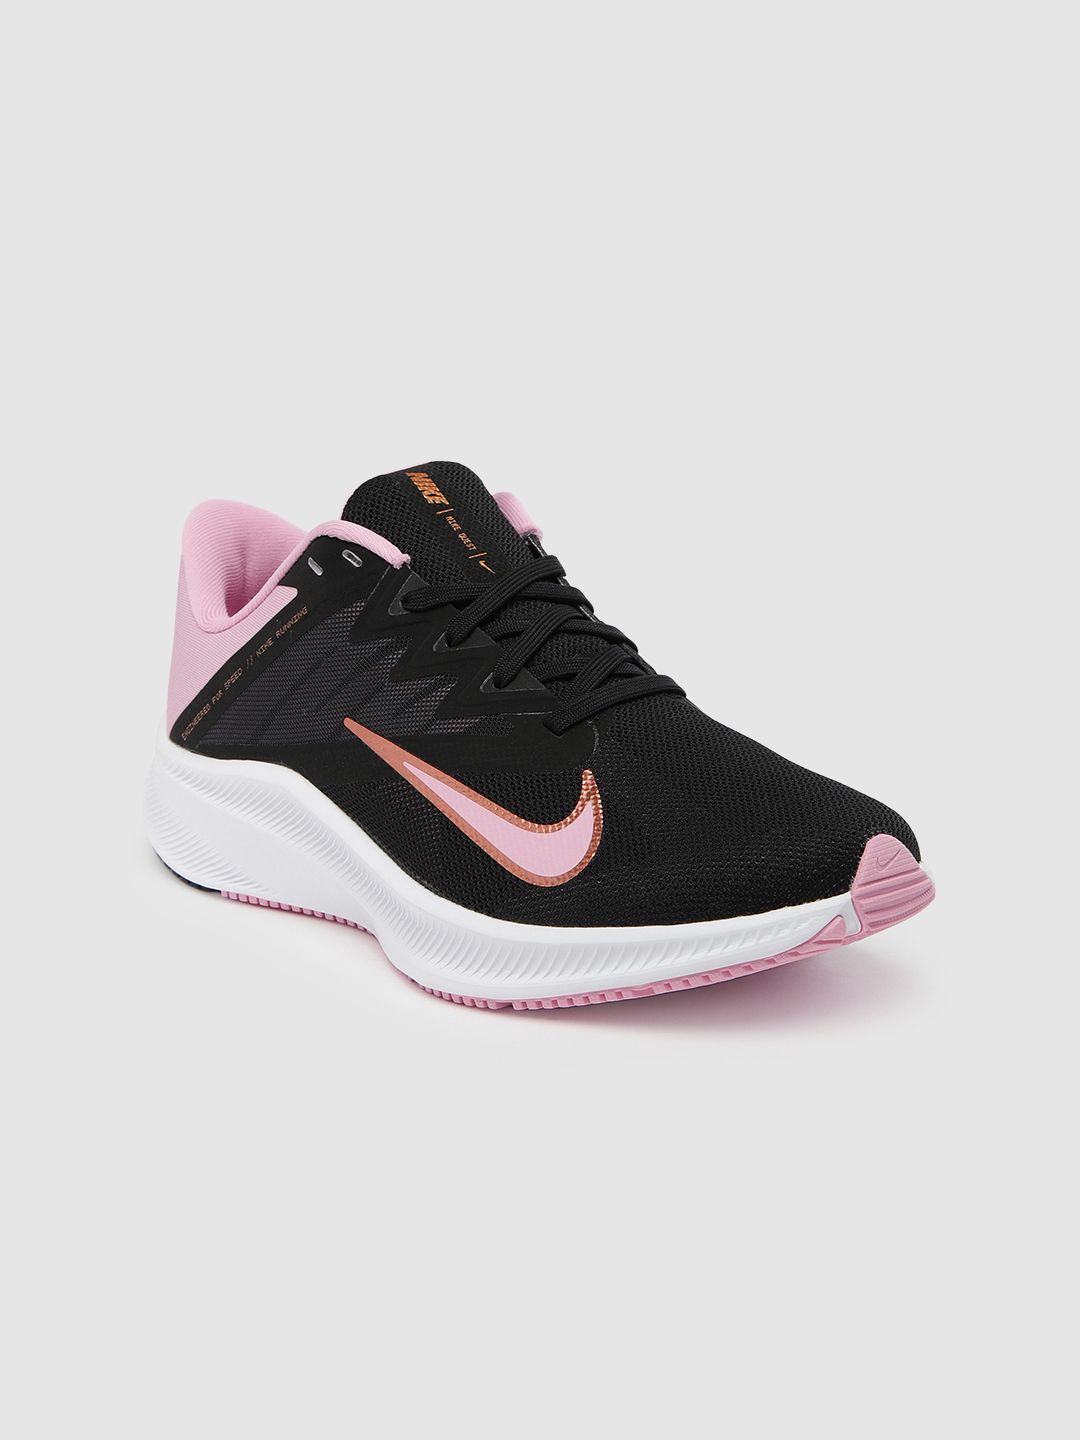 Nike Women Black QUEST 3 Running Shoes Price in India